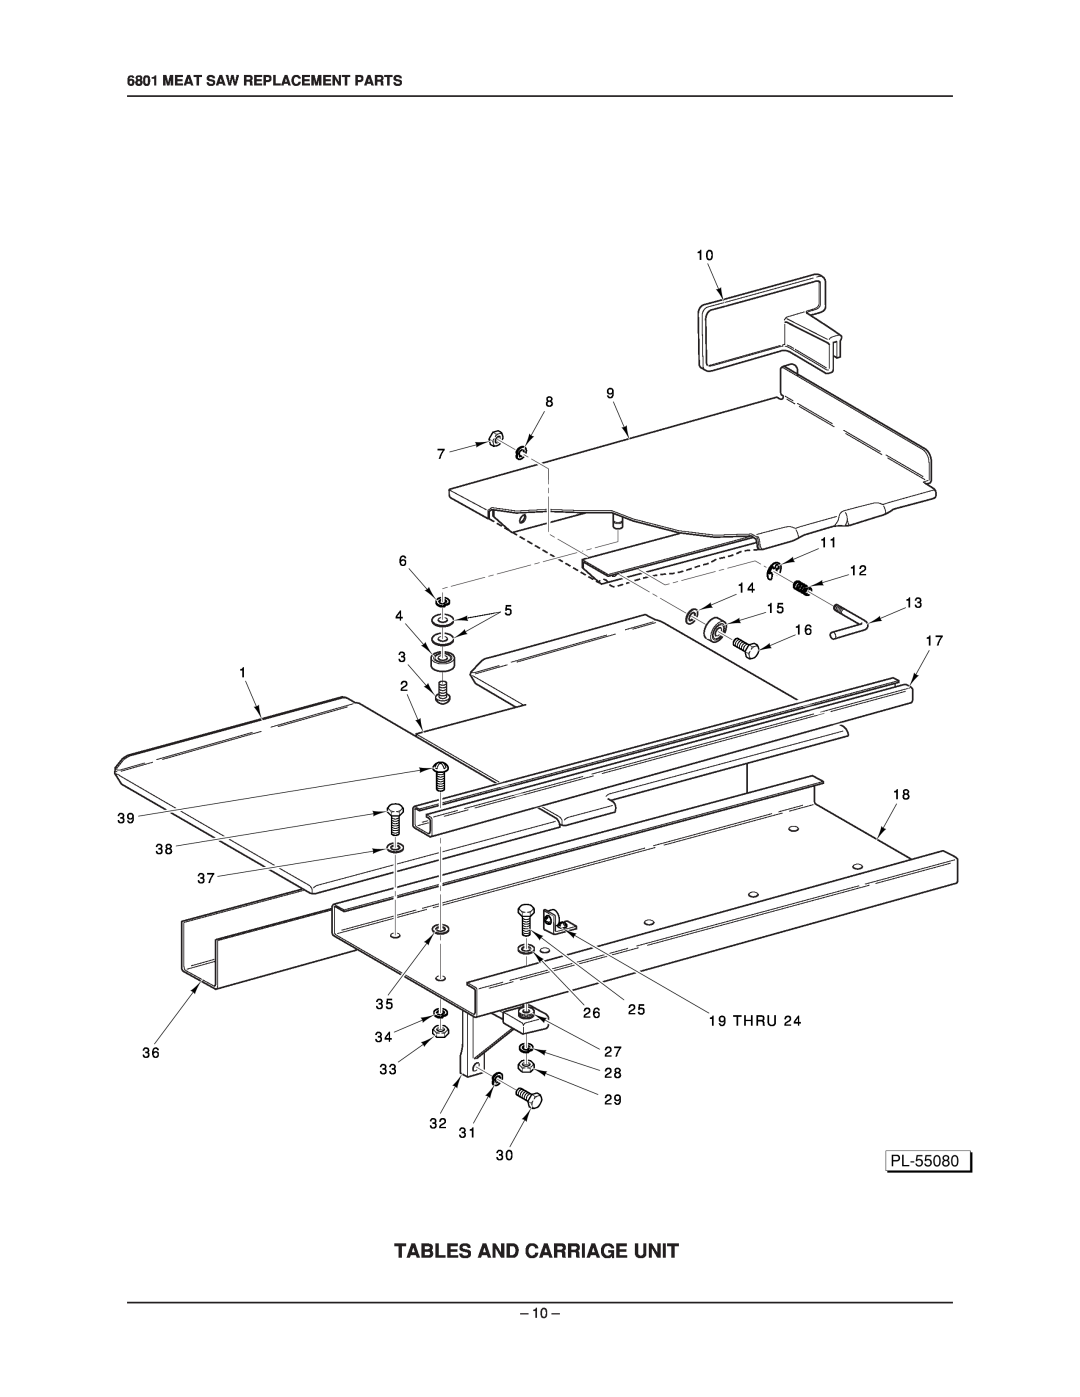 Hobart 6801 manual Tables And Carriage Unit, PL-55080, Meat Saw Replacement Parts 